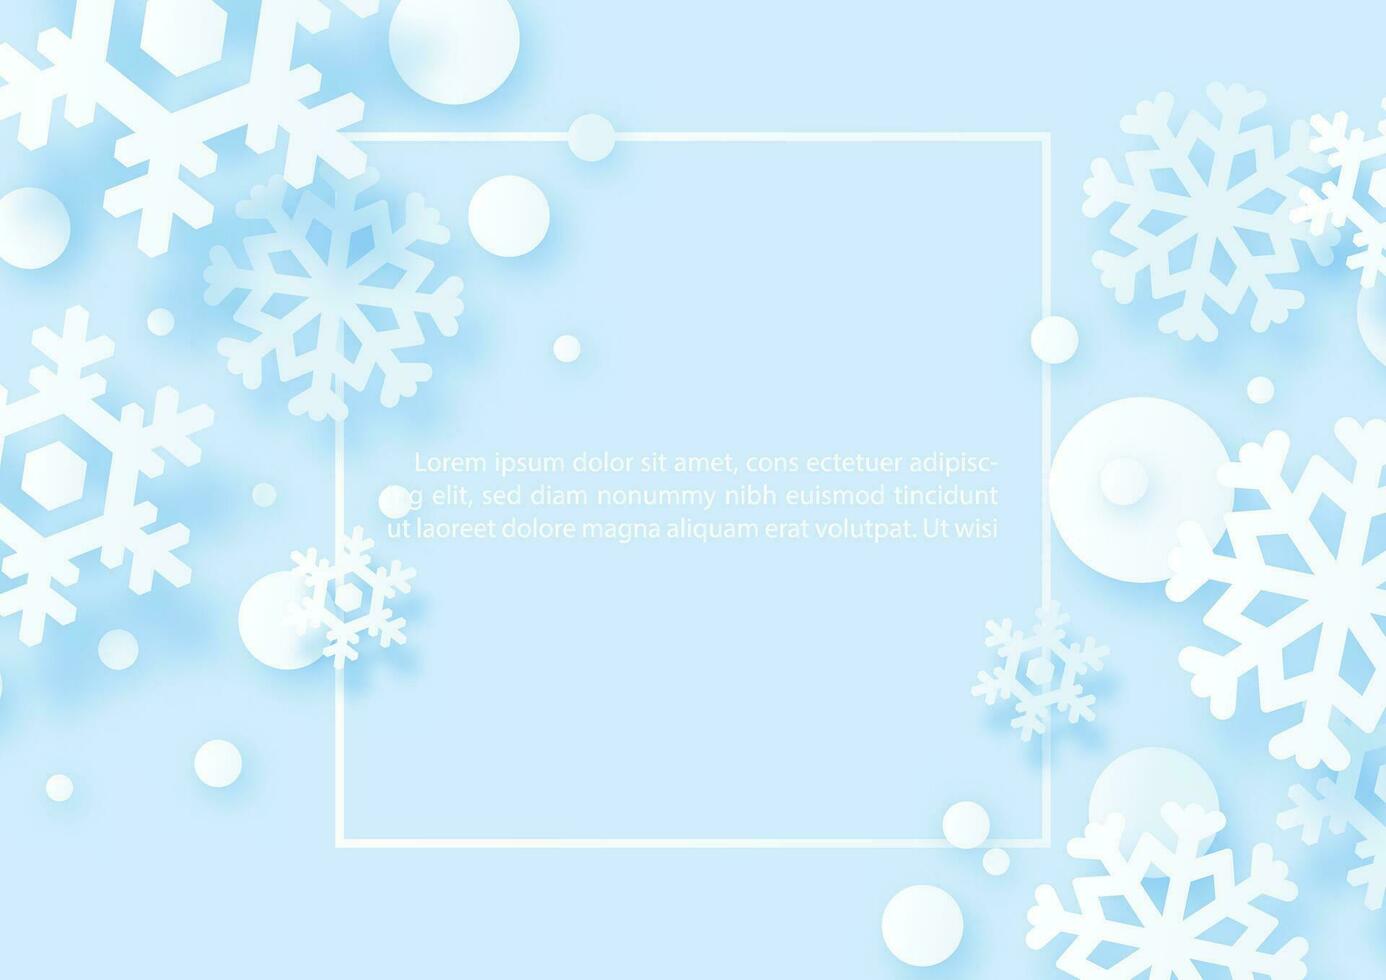 Silhouette snow flakes in paper cut style on square frame and example texts and blue paper pattern background. Christmas and new year greeting card celebration in vector design.